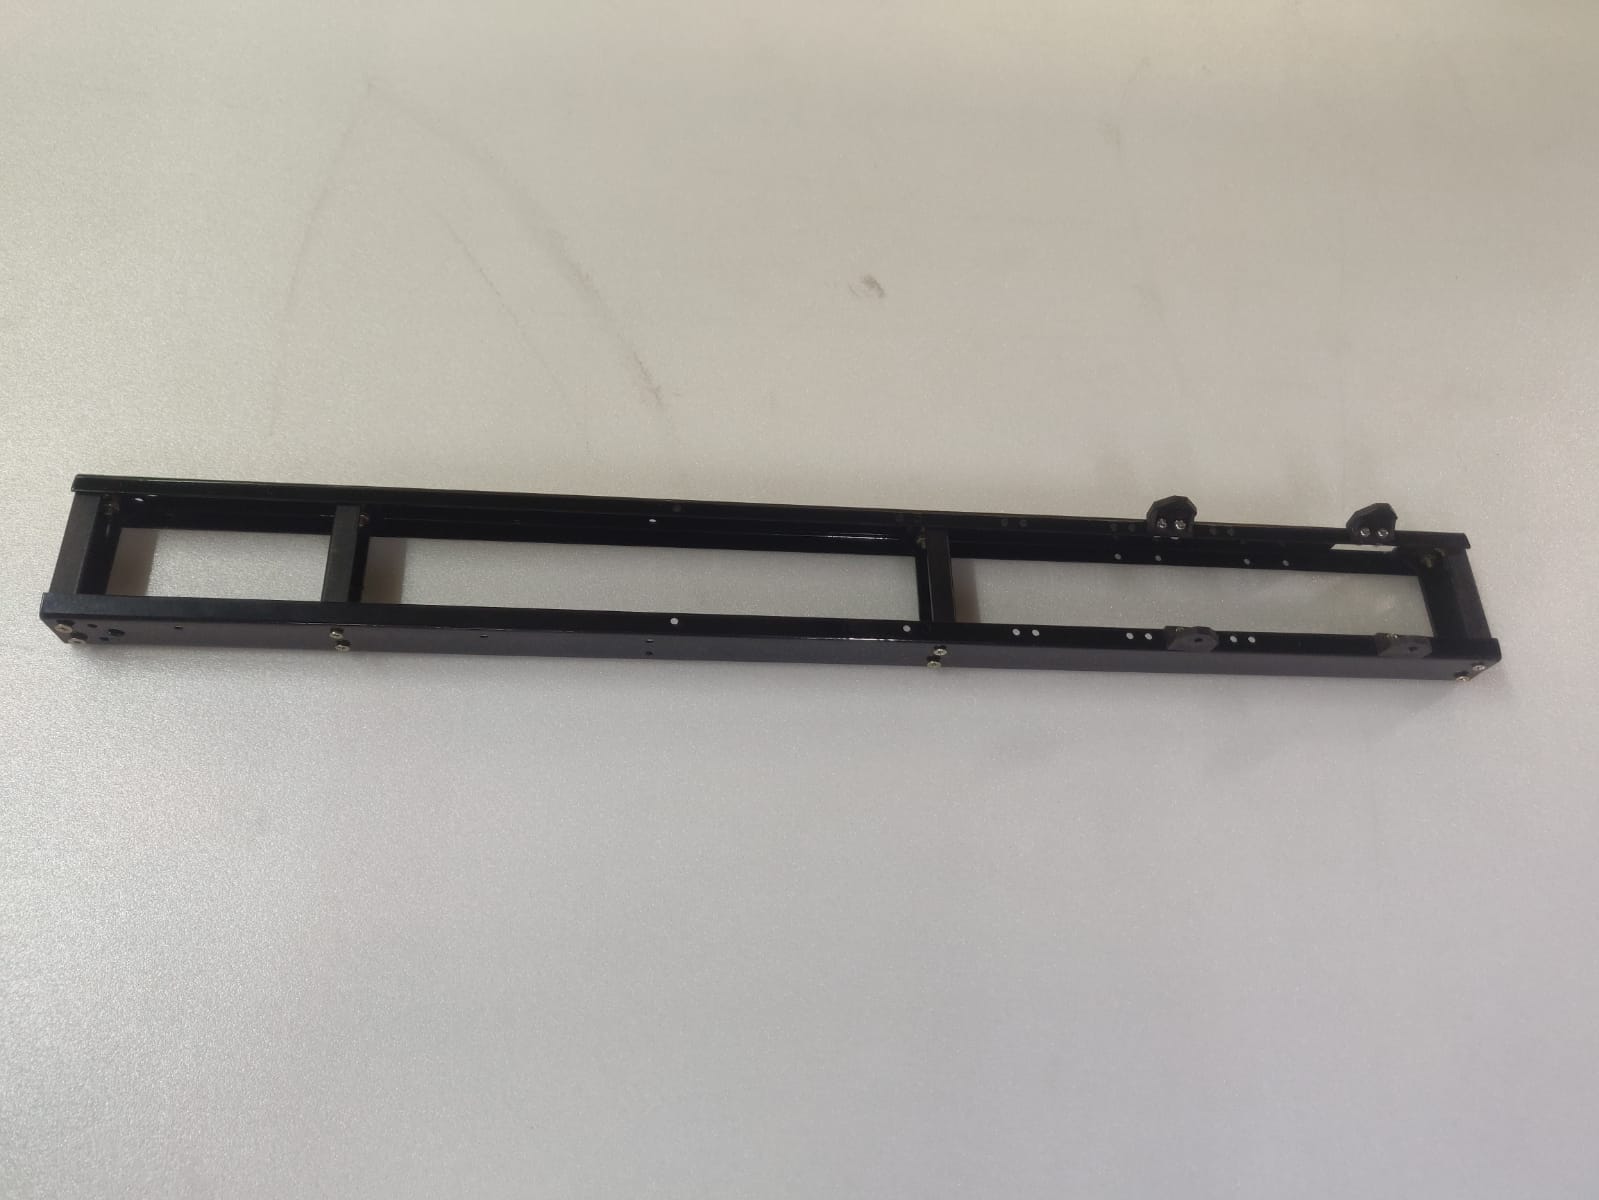 RC Truck chassis frame (Scale 1:18) BLACK Colour